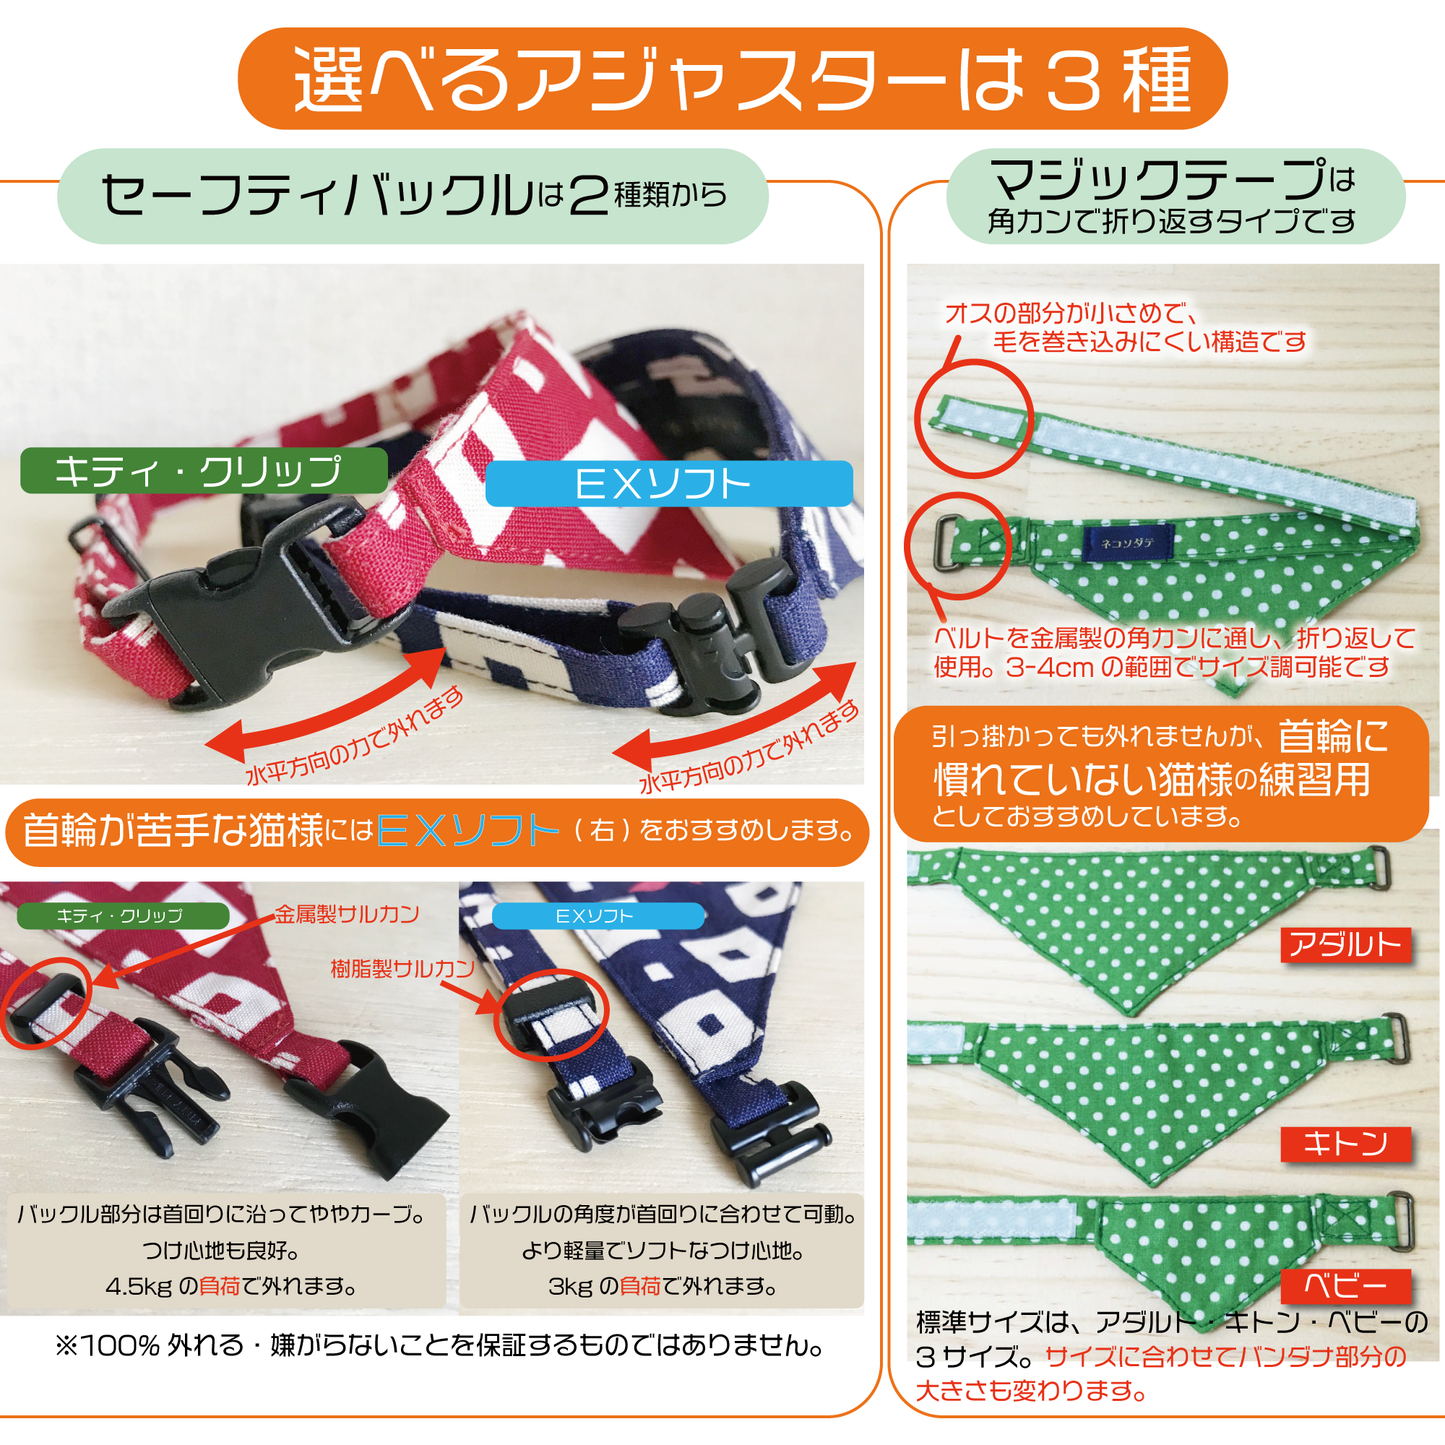 [Two-tone flower pattern blue] Serious collar, conspicuous bandana style / selectable adjuster